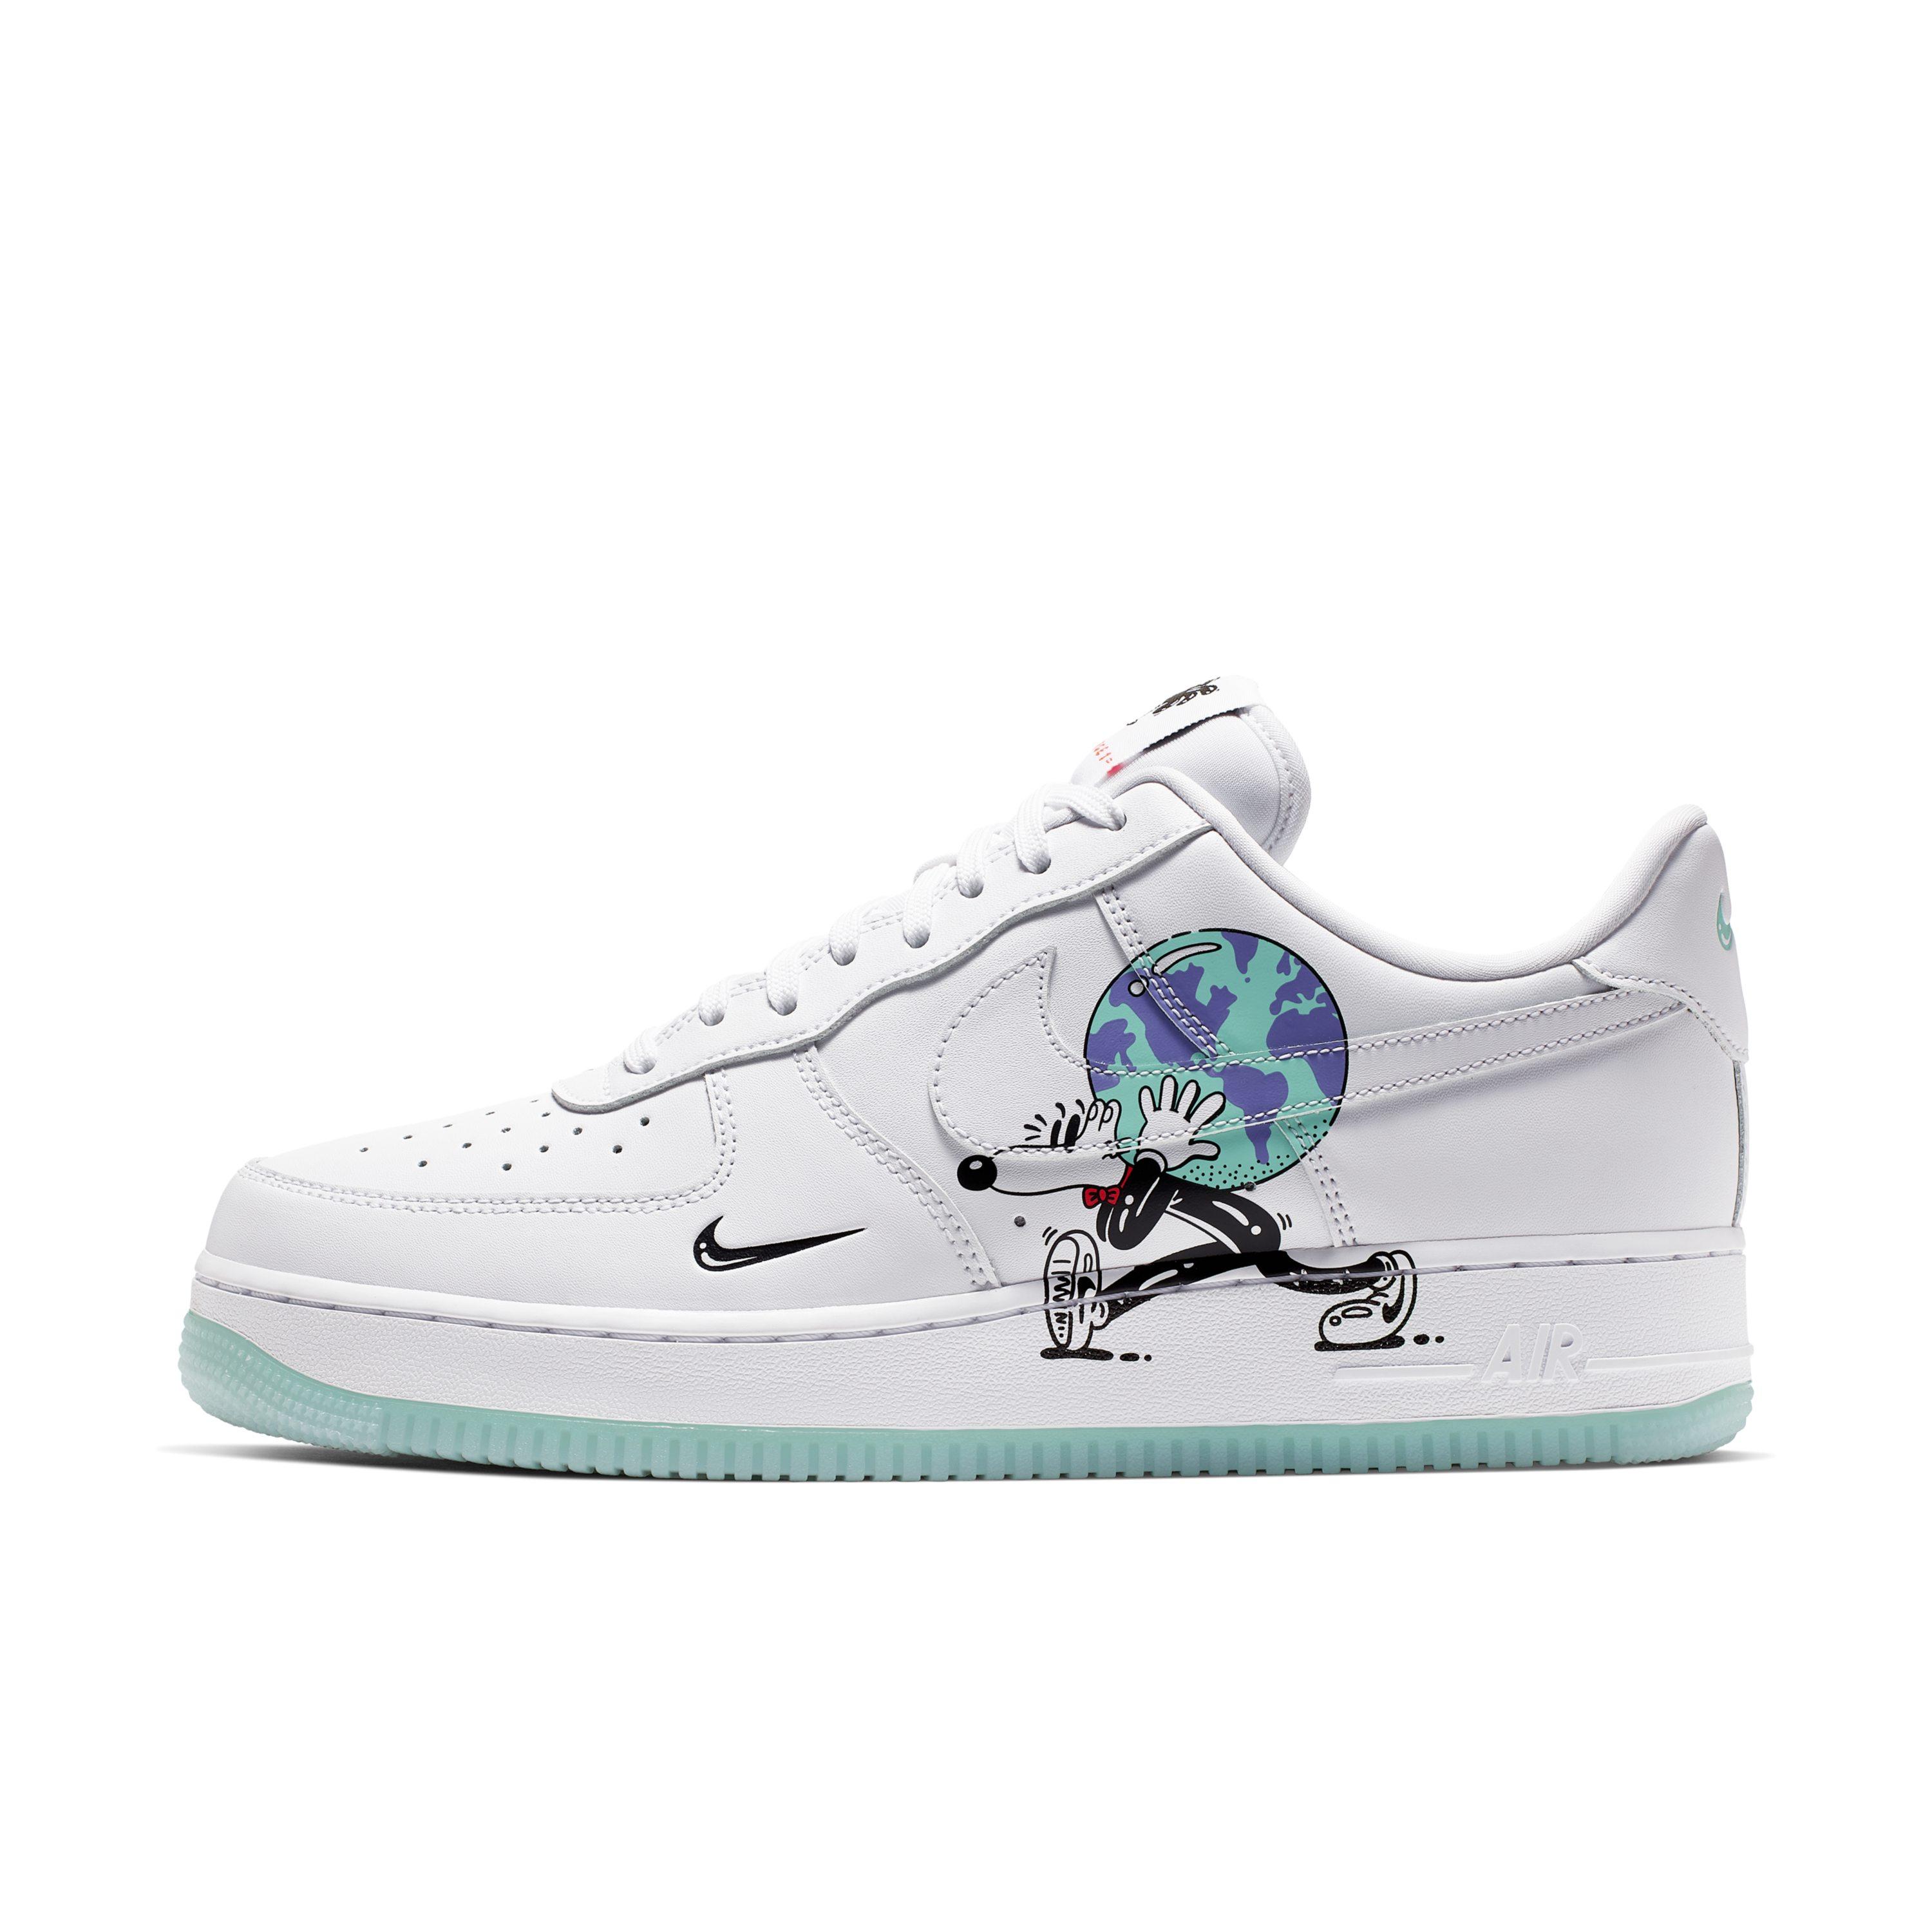 Nike Air Force 1 Qs Flyleather With At 